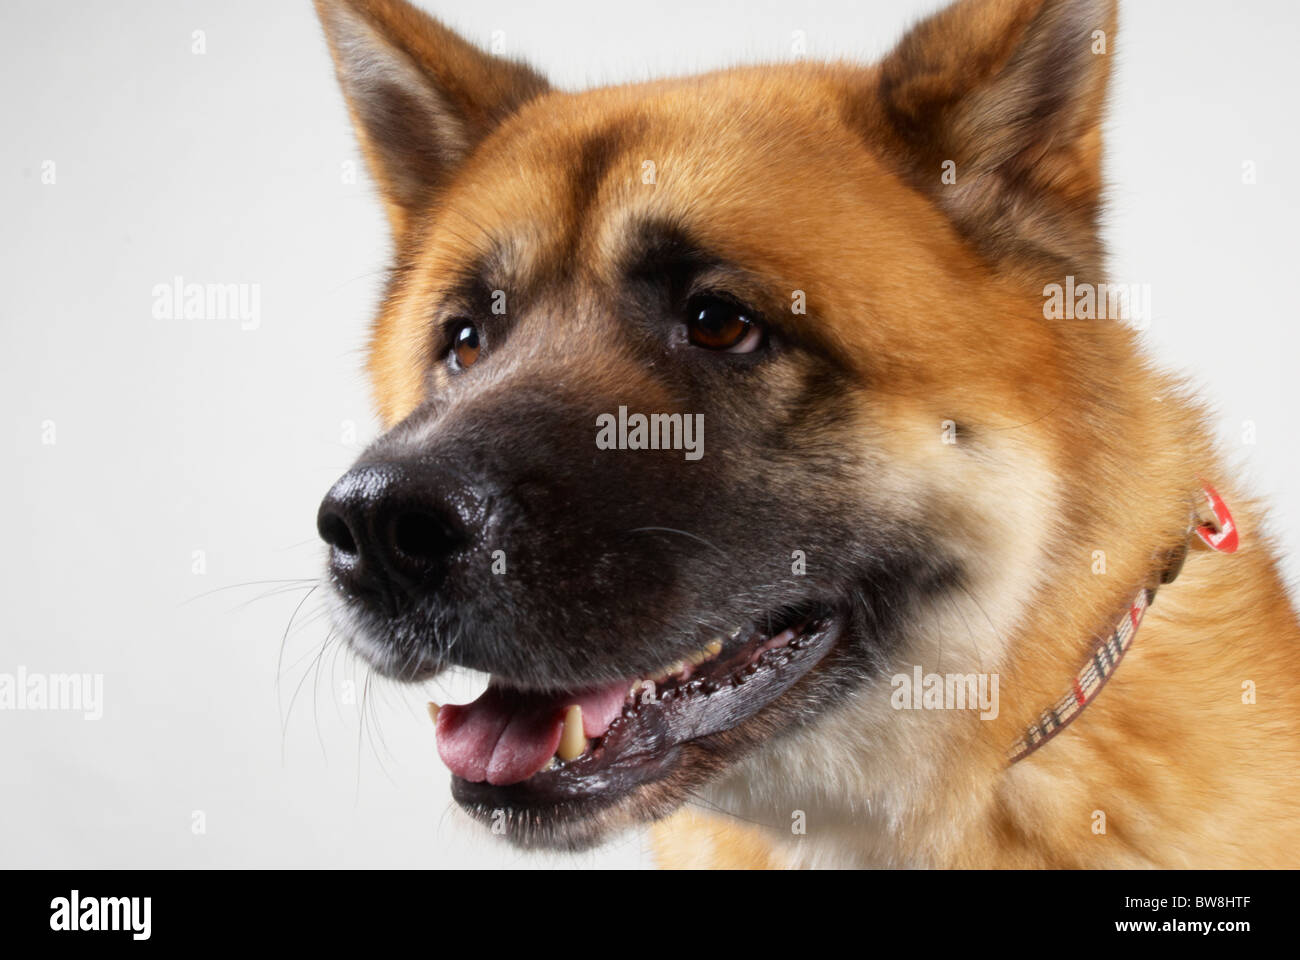 Japanese Akita called Kendo (aged 4 years old). Stock Photo